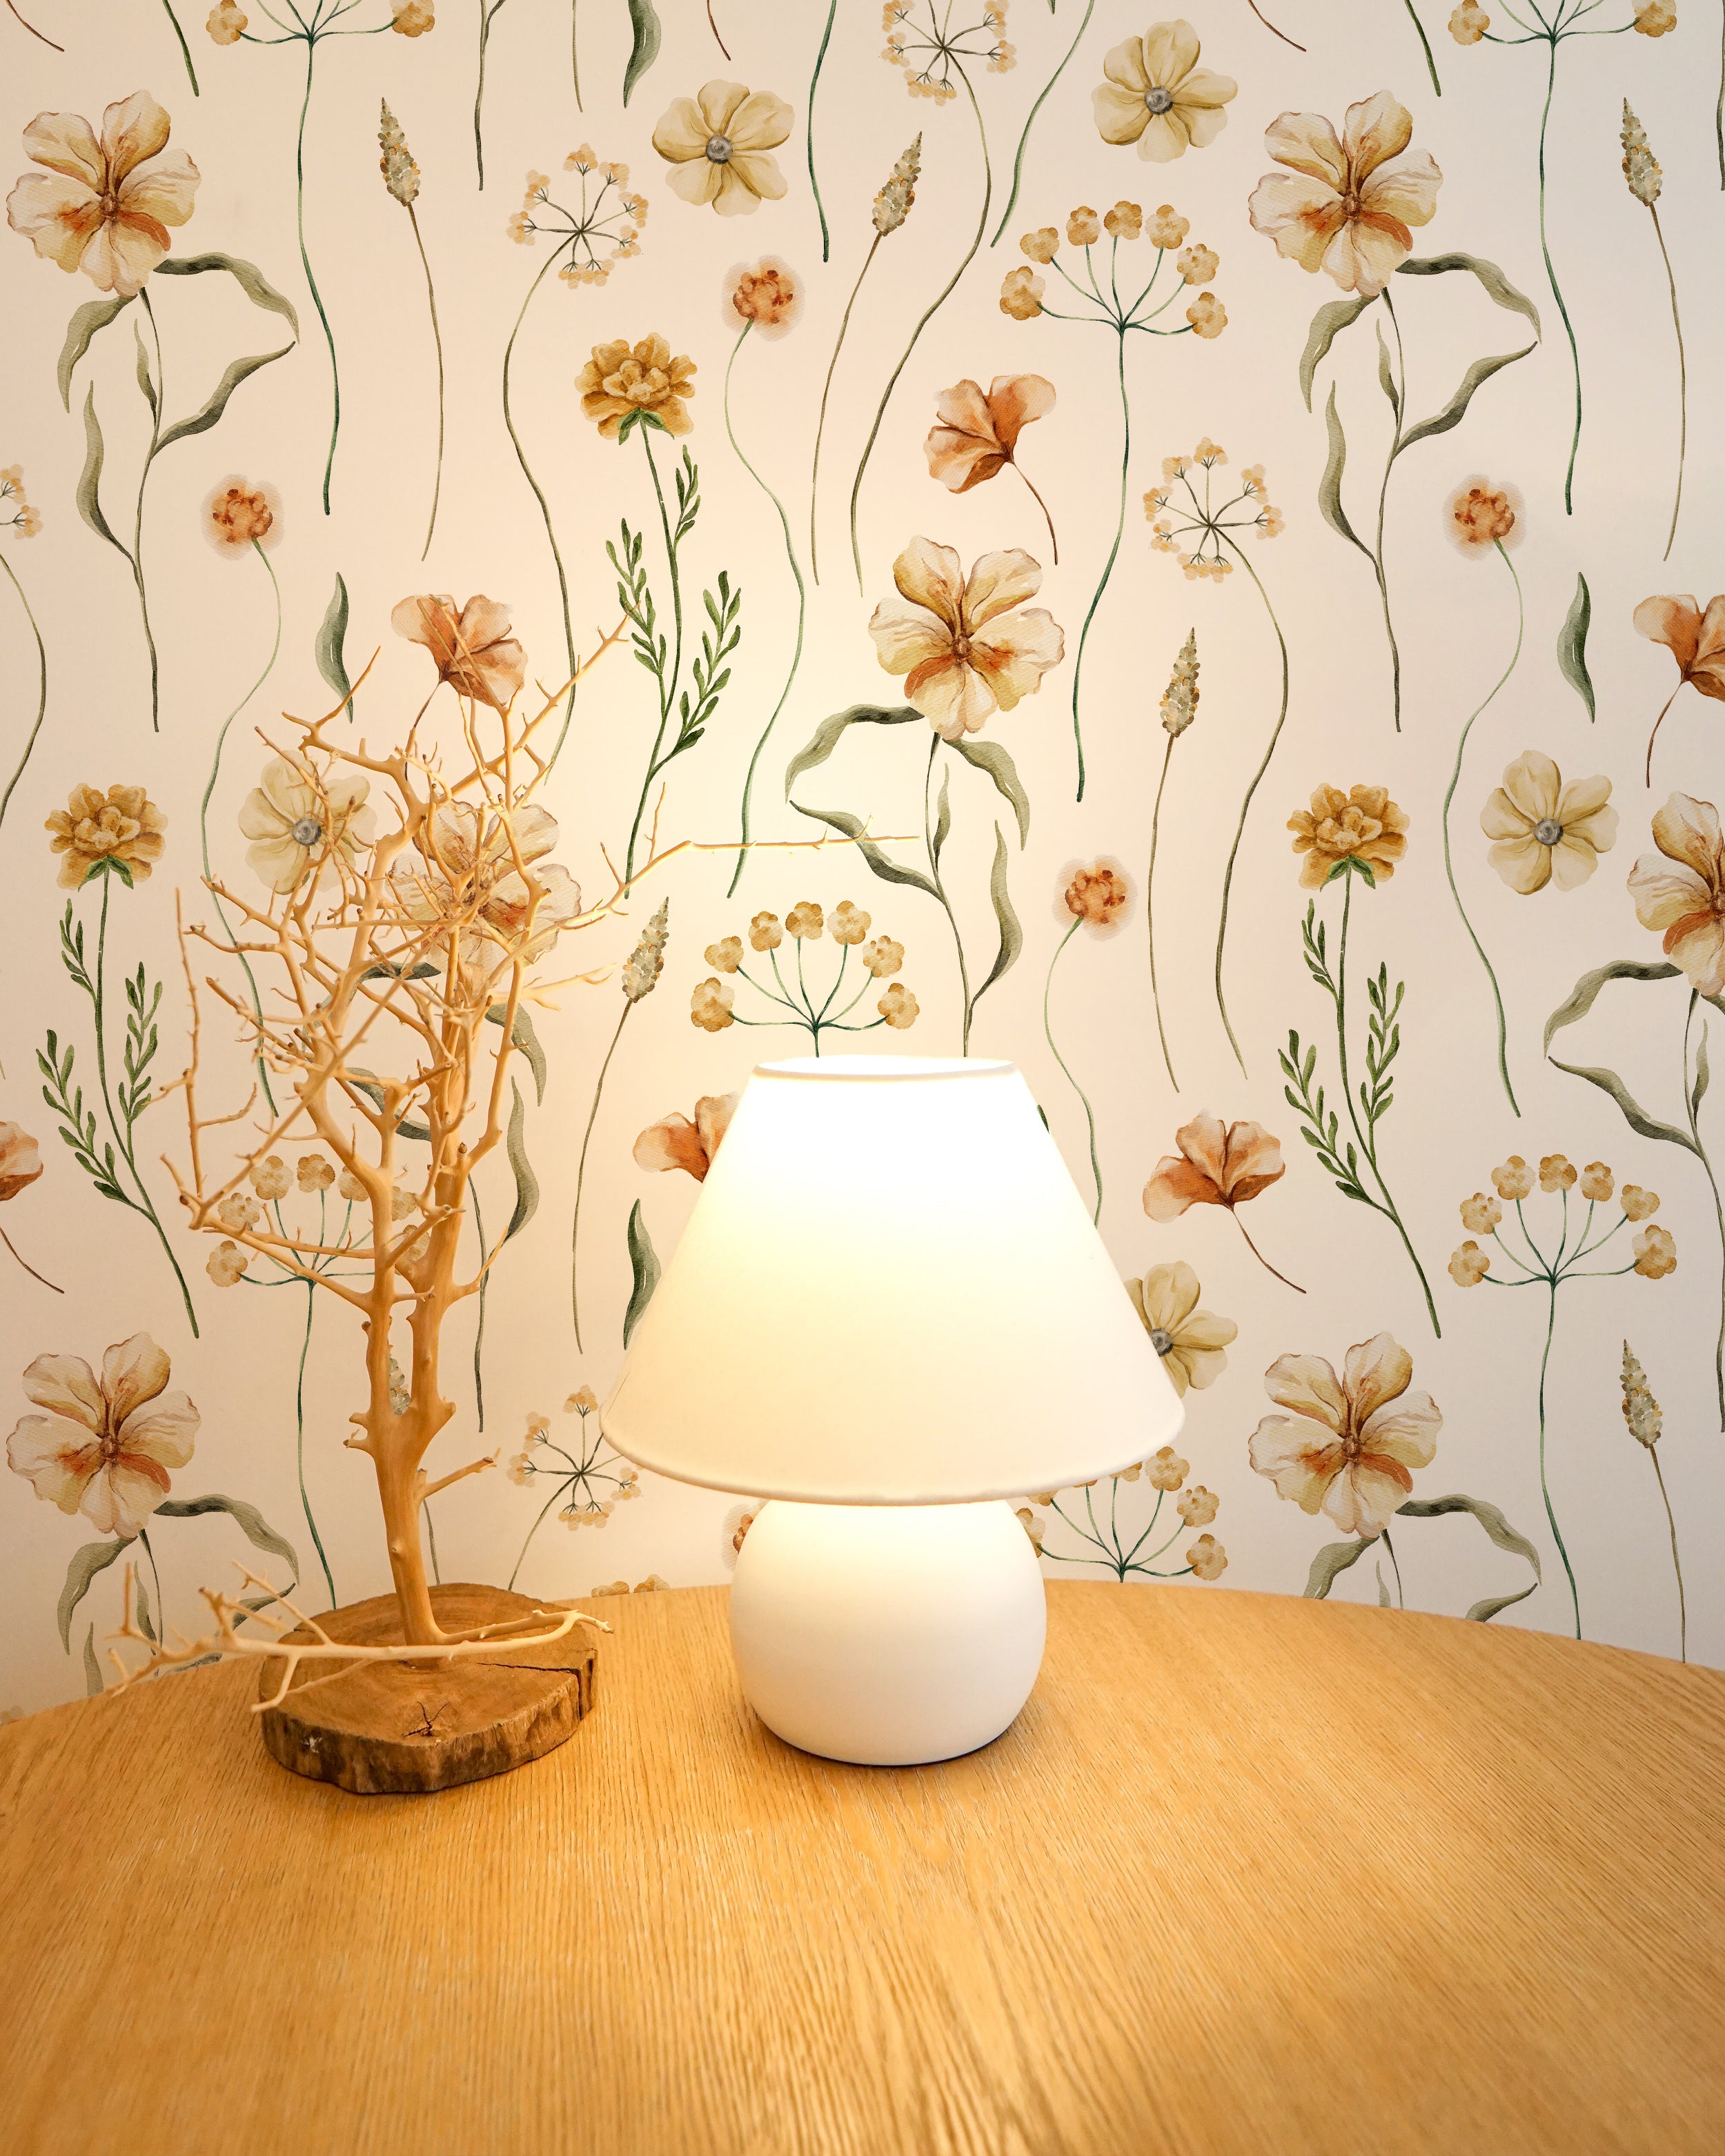 A serene bedside setup with the Warm Glow Floral Wallpaper providing a tranquil background. A simple white lamp on a wooden nightstand complements the wallpaper’s floral motifs, creating a peaceful and relaxing bedroom ambiance